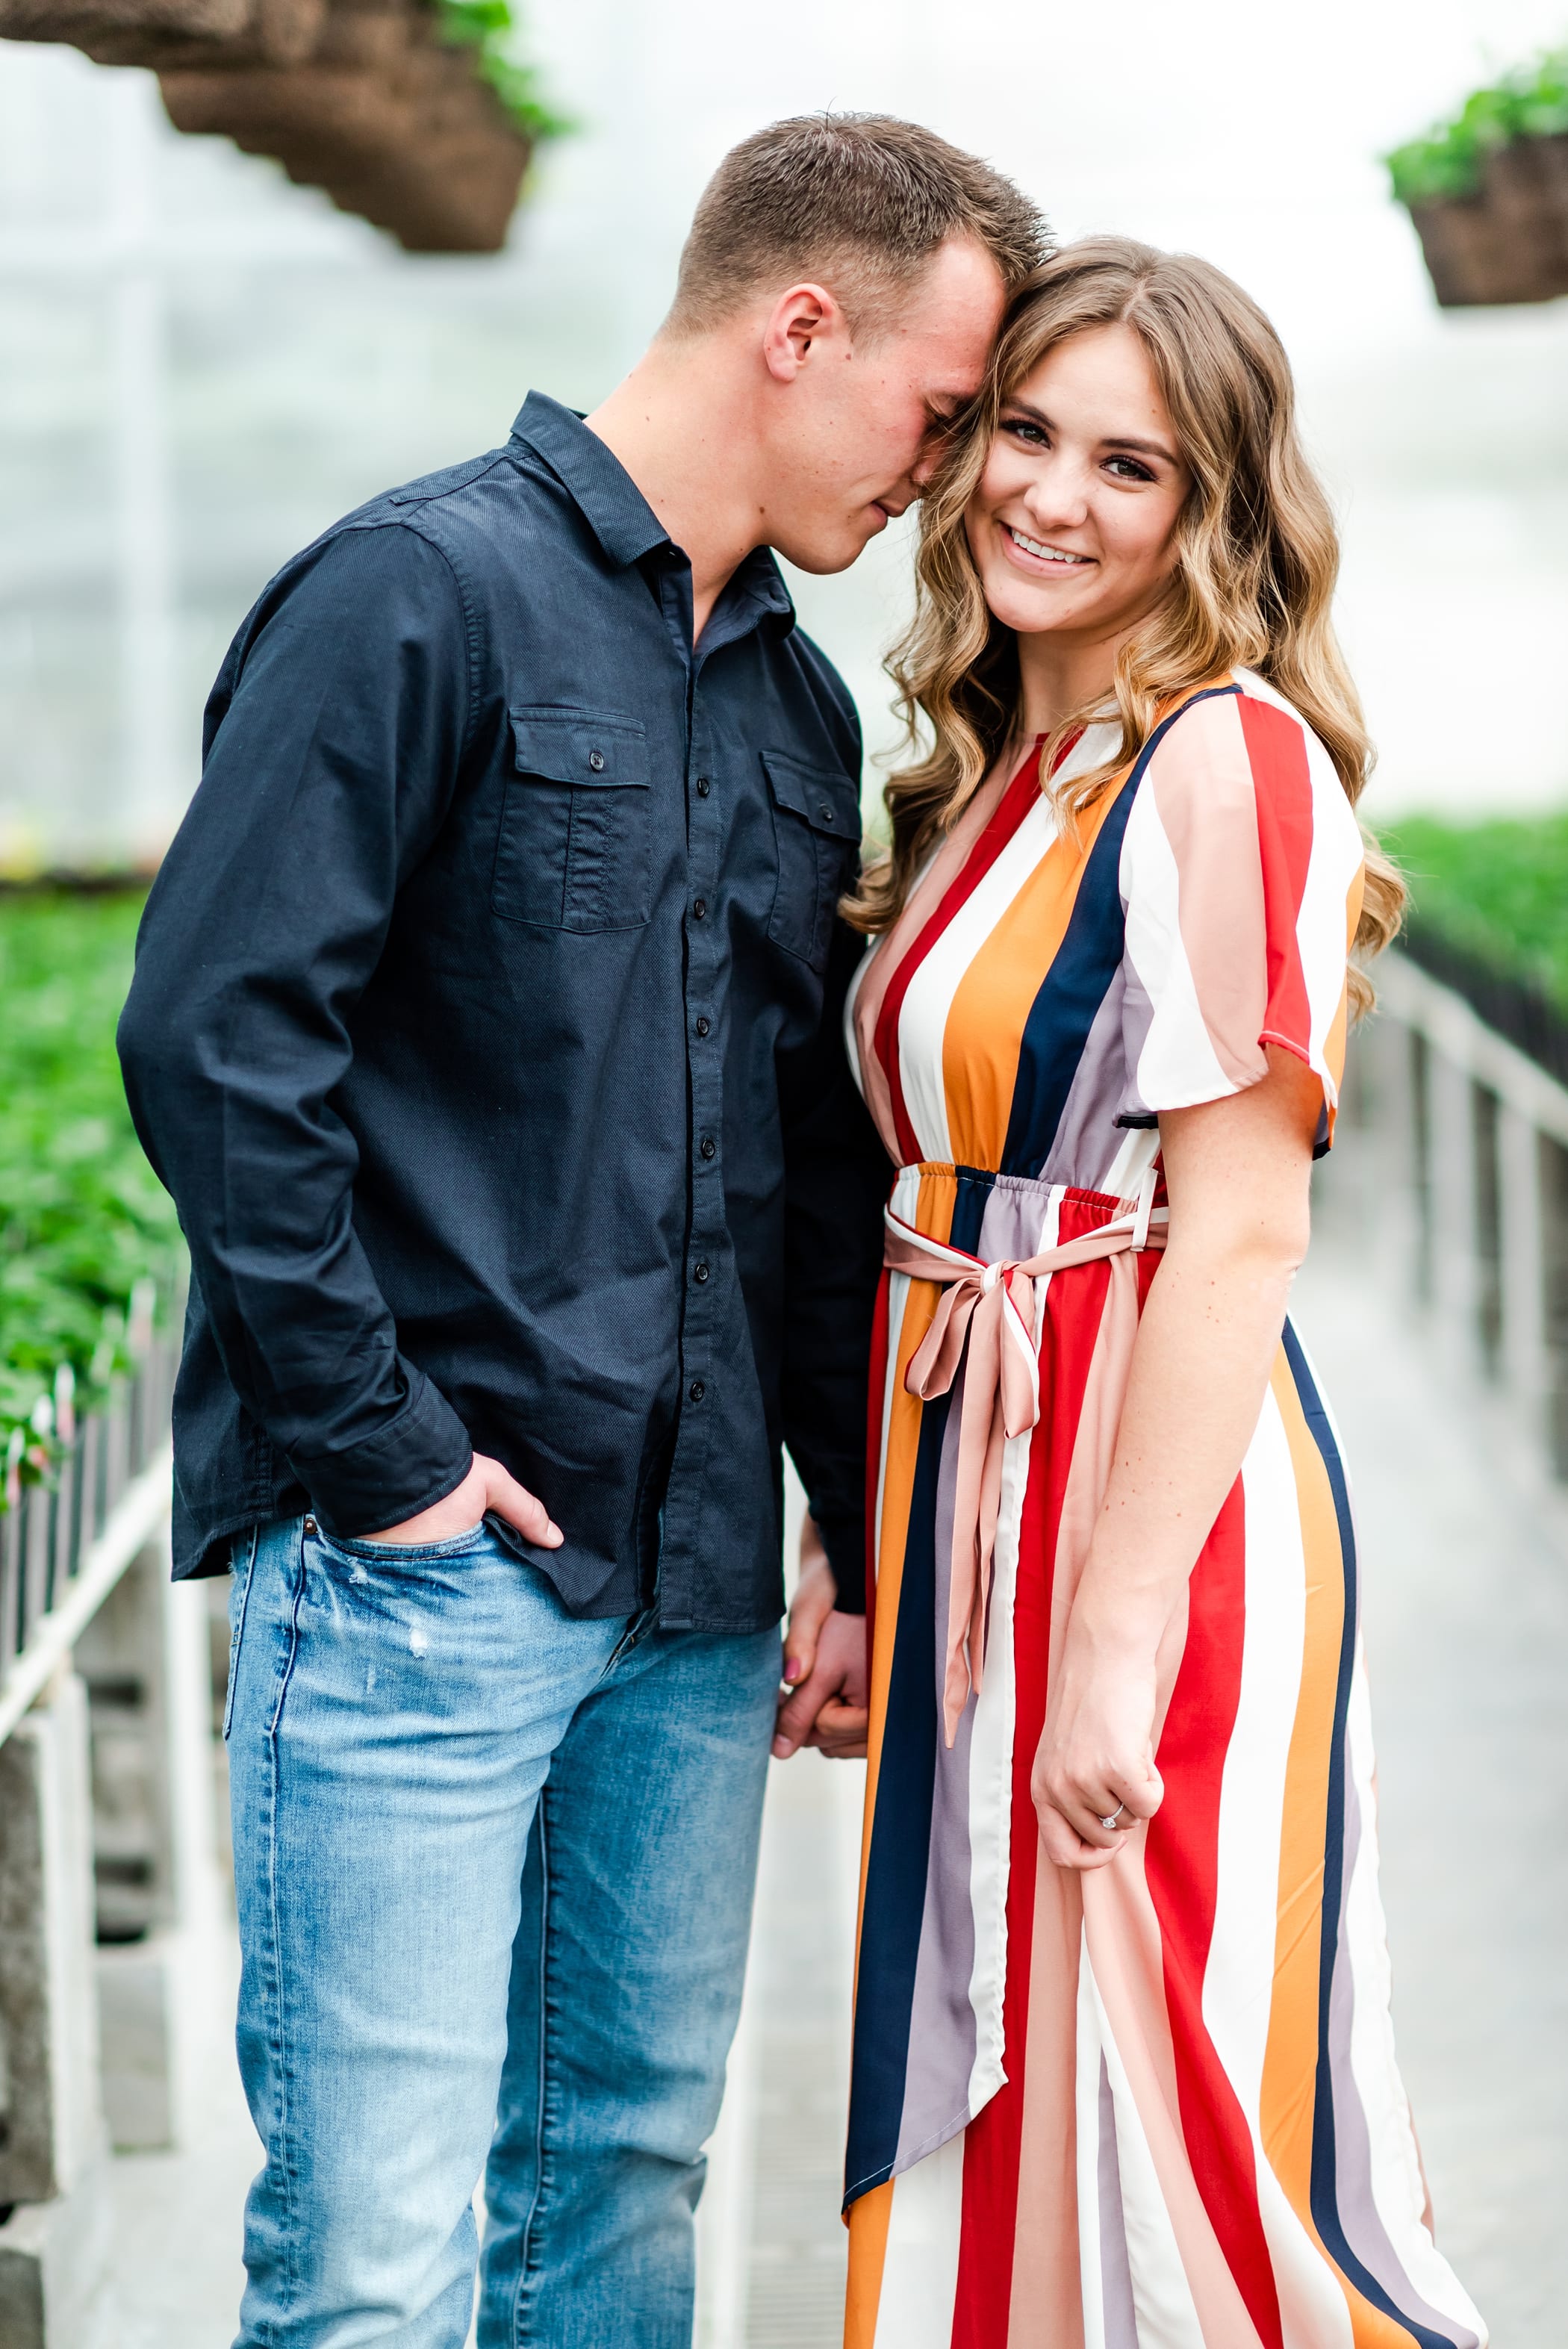 Spring engagement session in a greenhouse